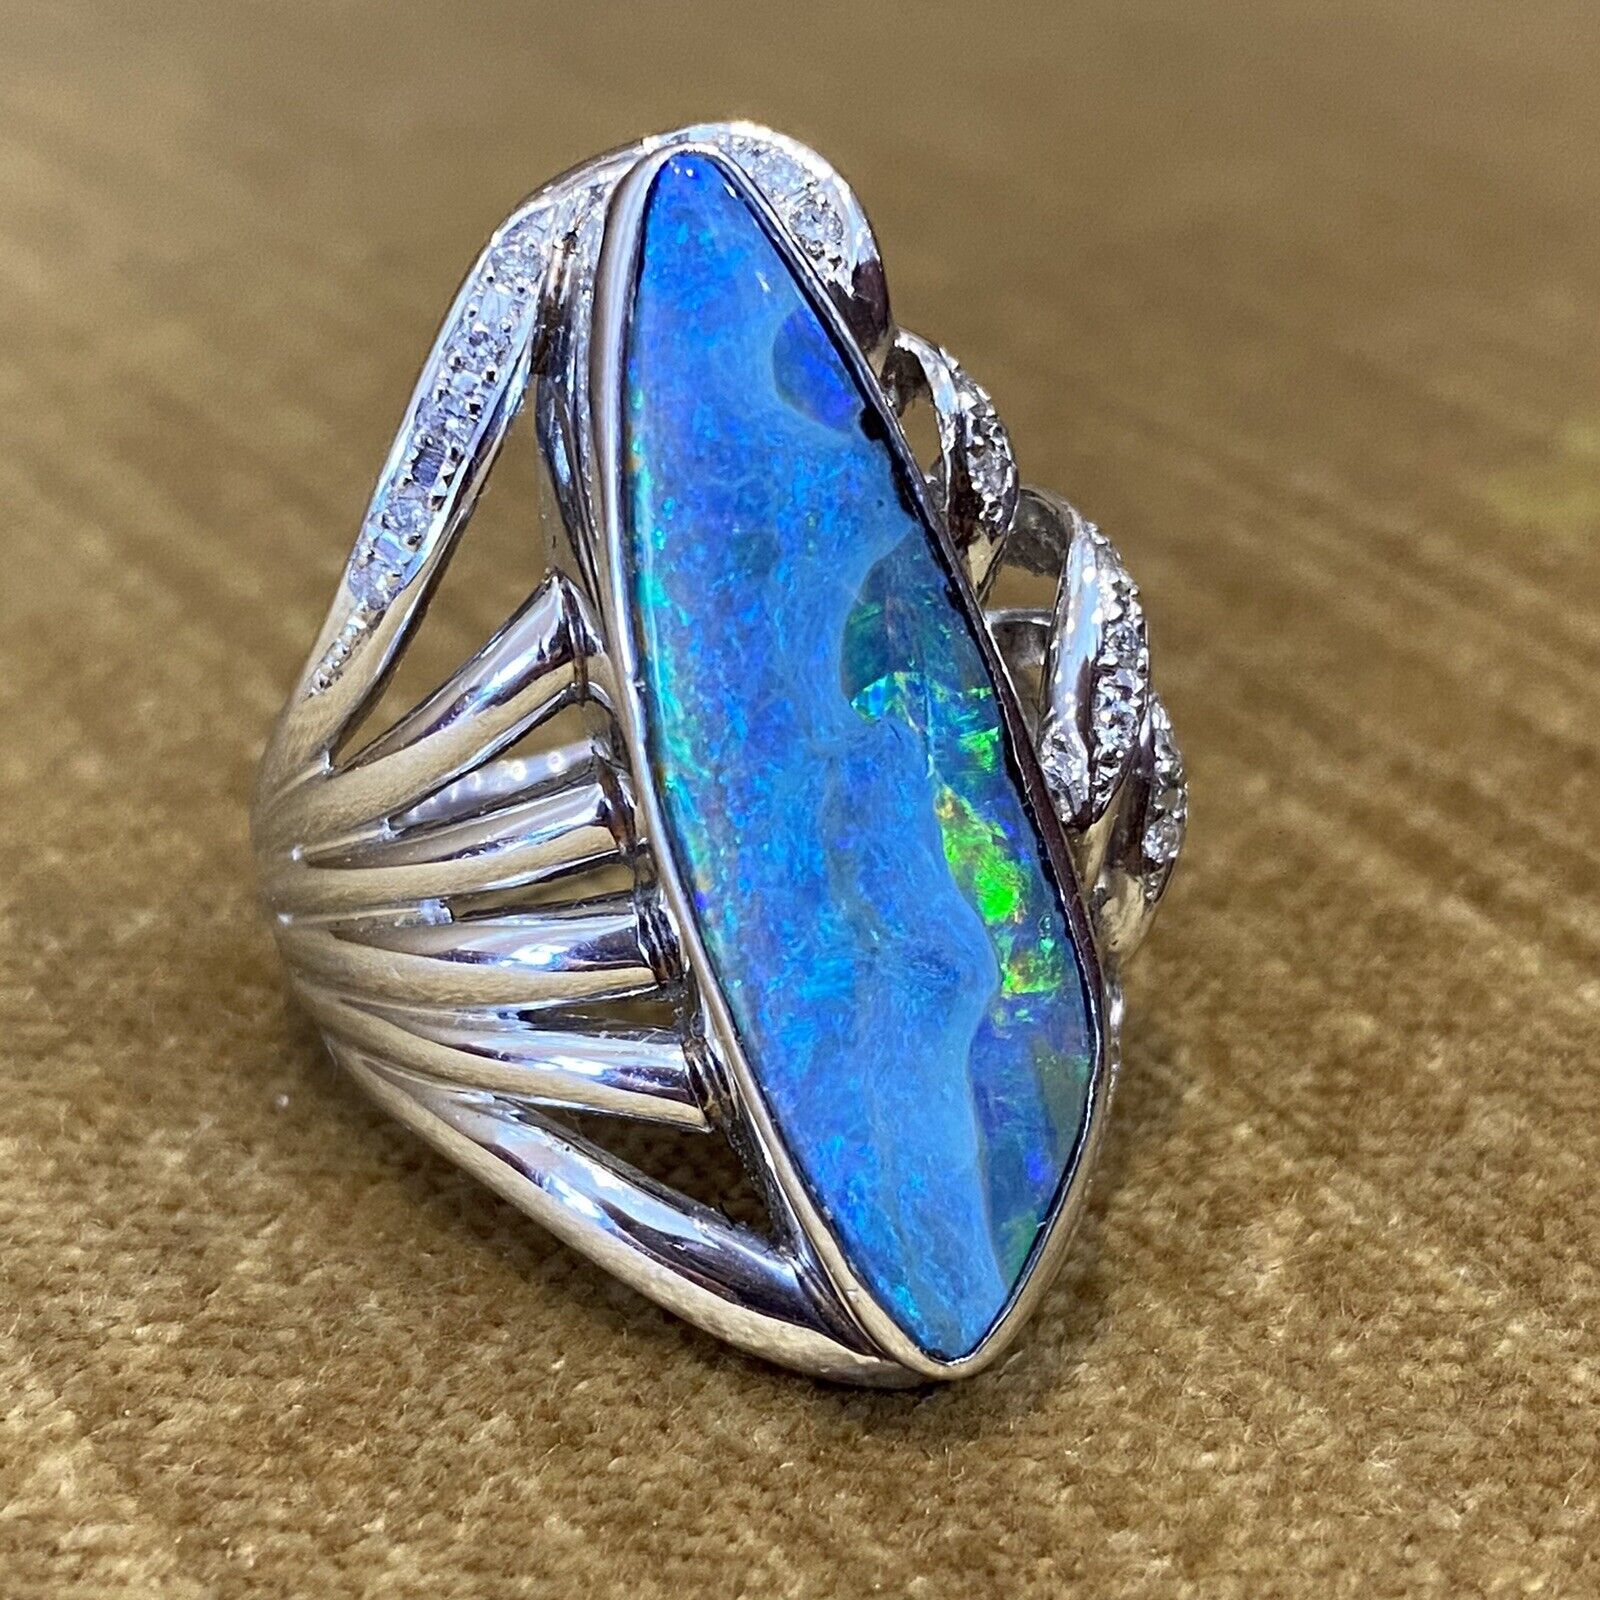 7.89 cts Boulder Opal & Diamond Cocktail Ring in Platinum